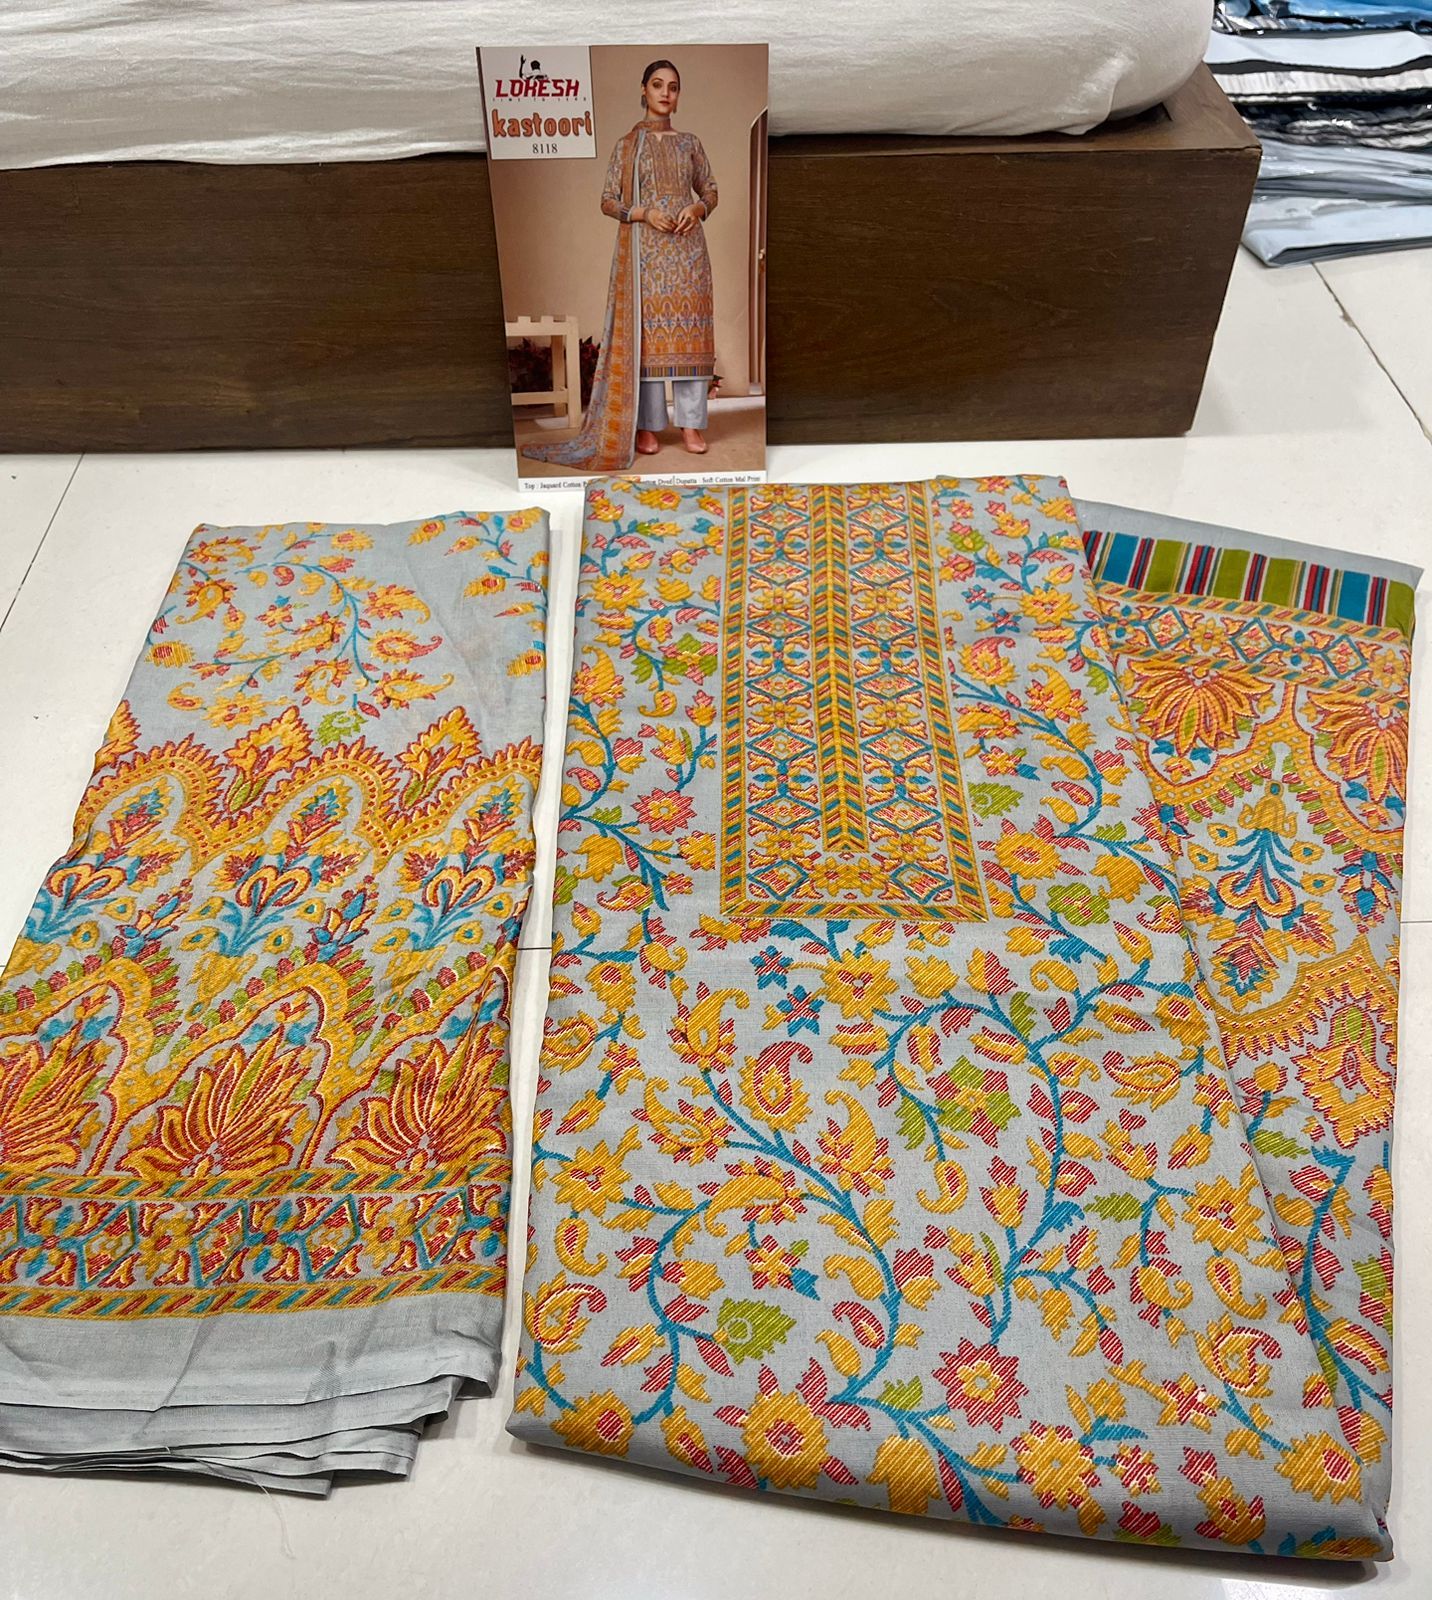 Find Pure kani famous thn of kashmir by Pashmina Shawls and suits blankets  sarees stools near me | Madhapur, Hyderabad, Telangana | Anar B2B Business  App